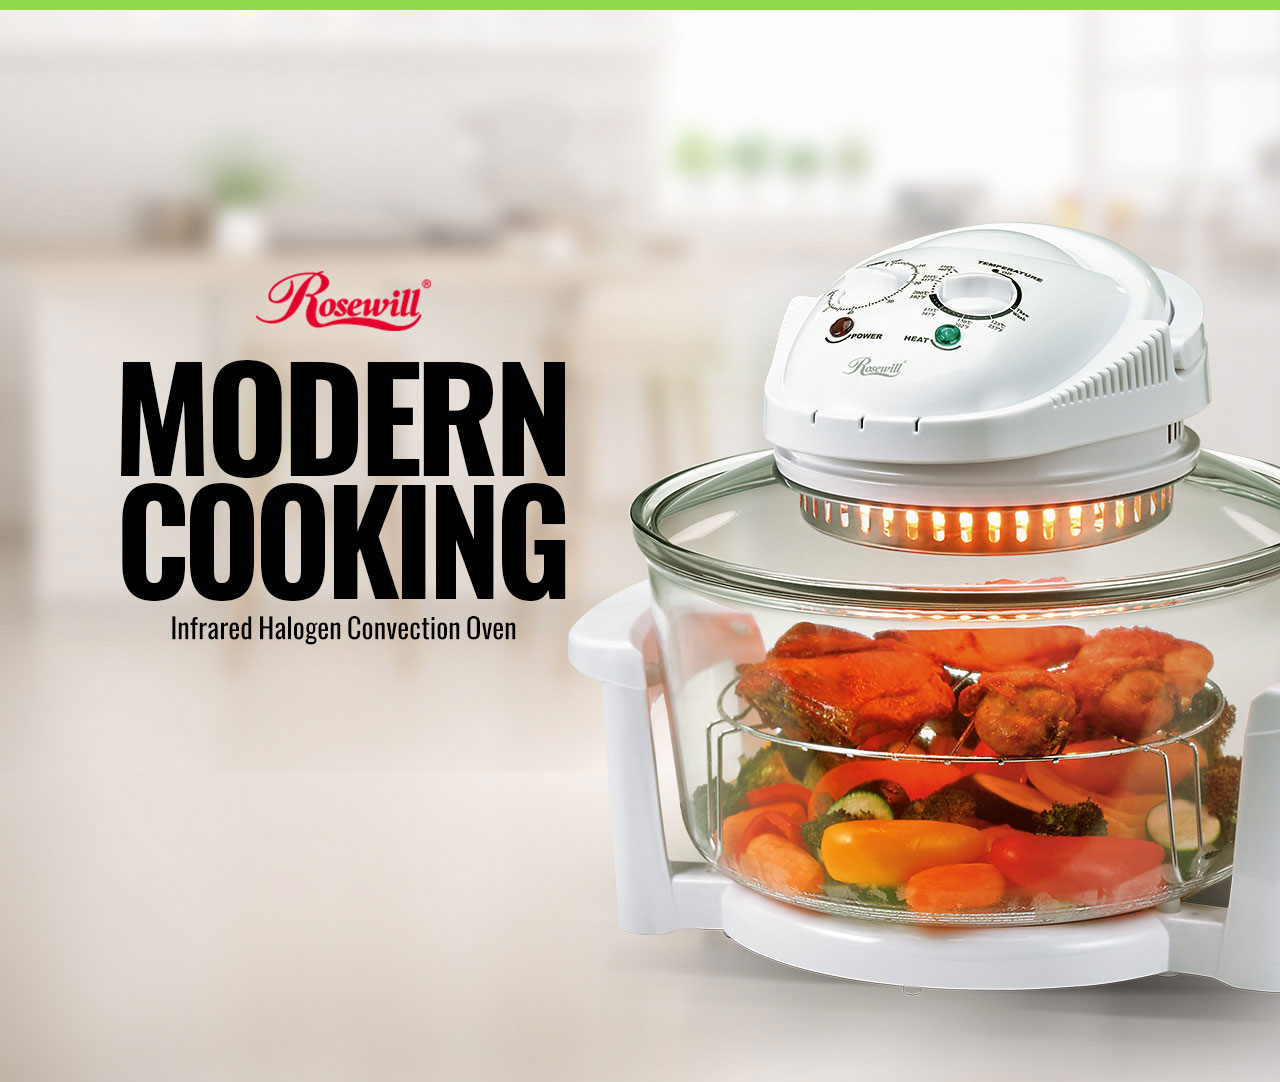 Rosewill Infrared Halogen Convection Oven with various vegetables next to text that reads: MODERN COOKING - Infrared Halogen Convection Oven